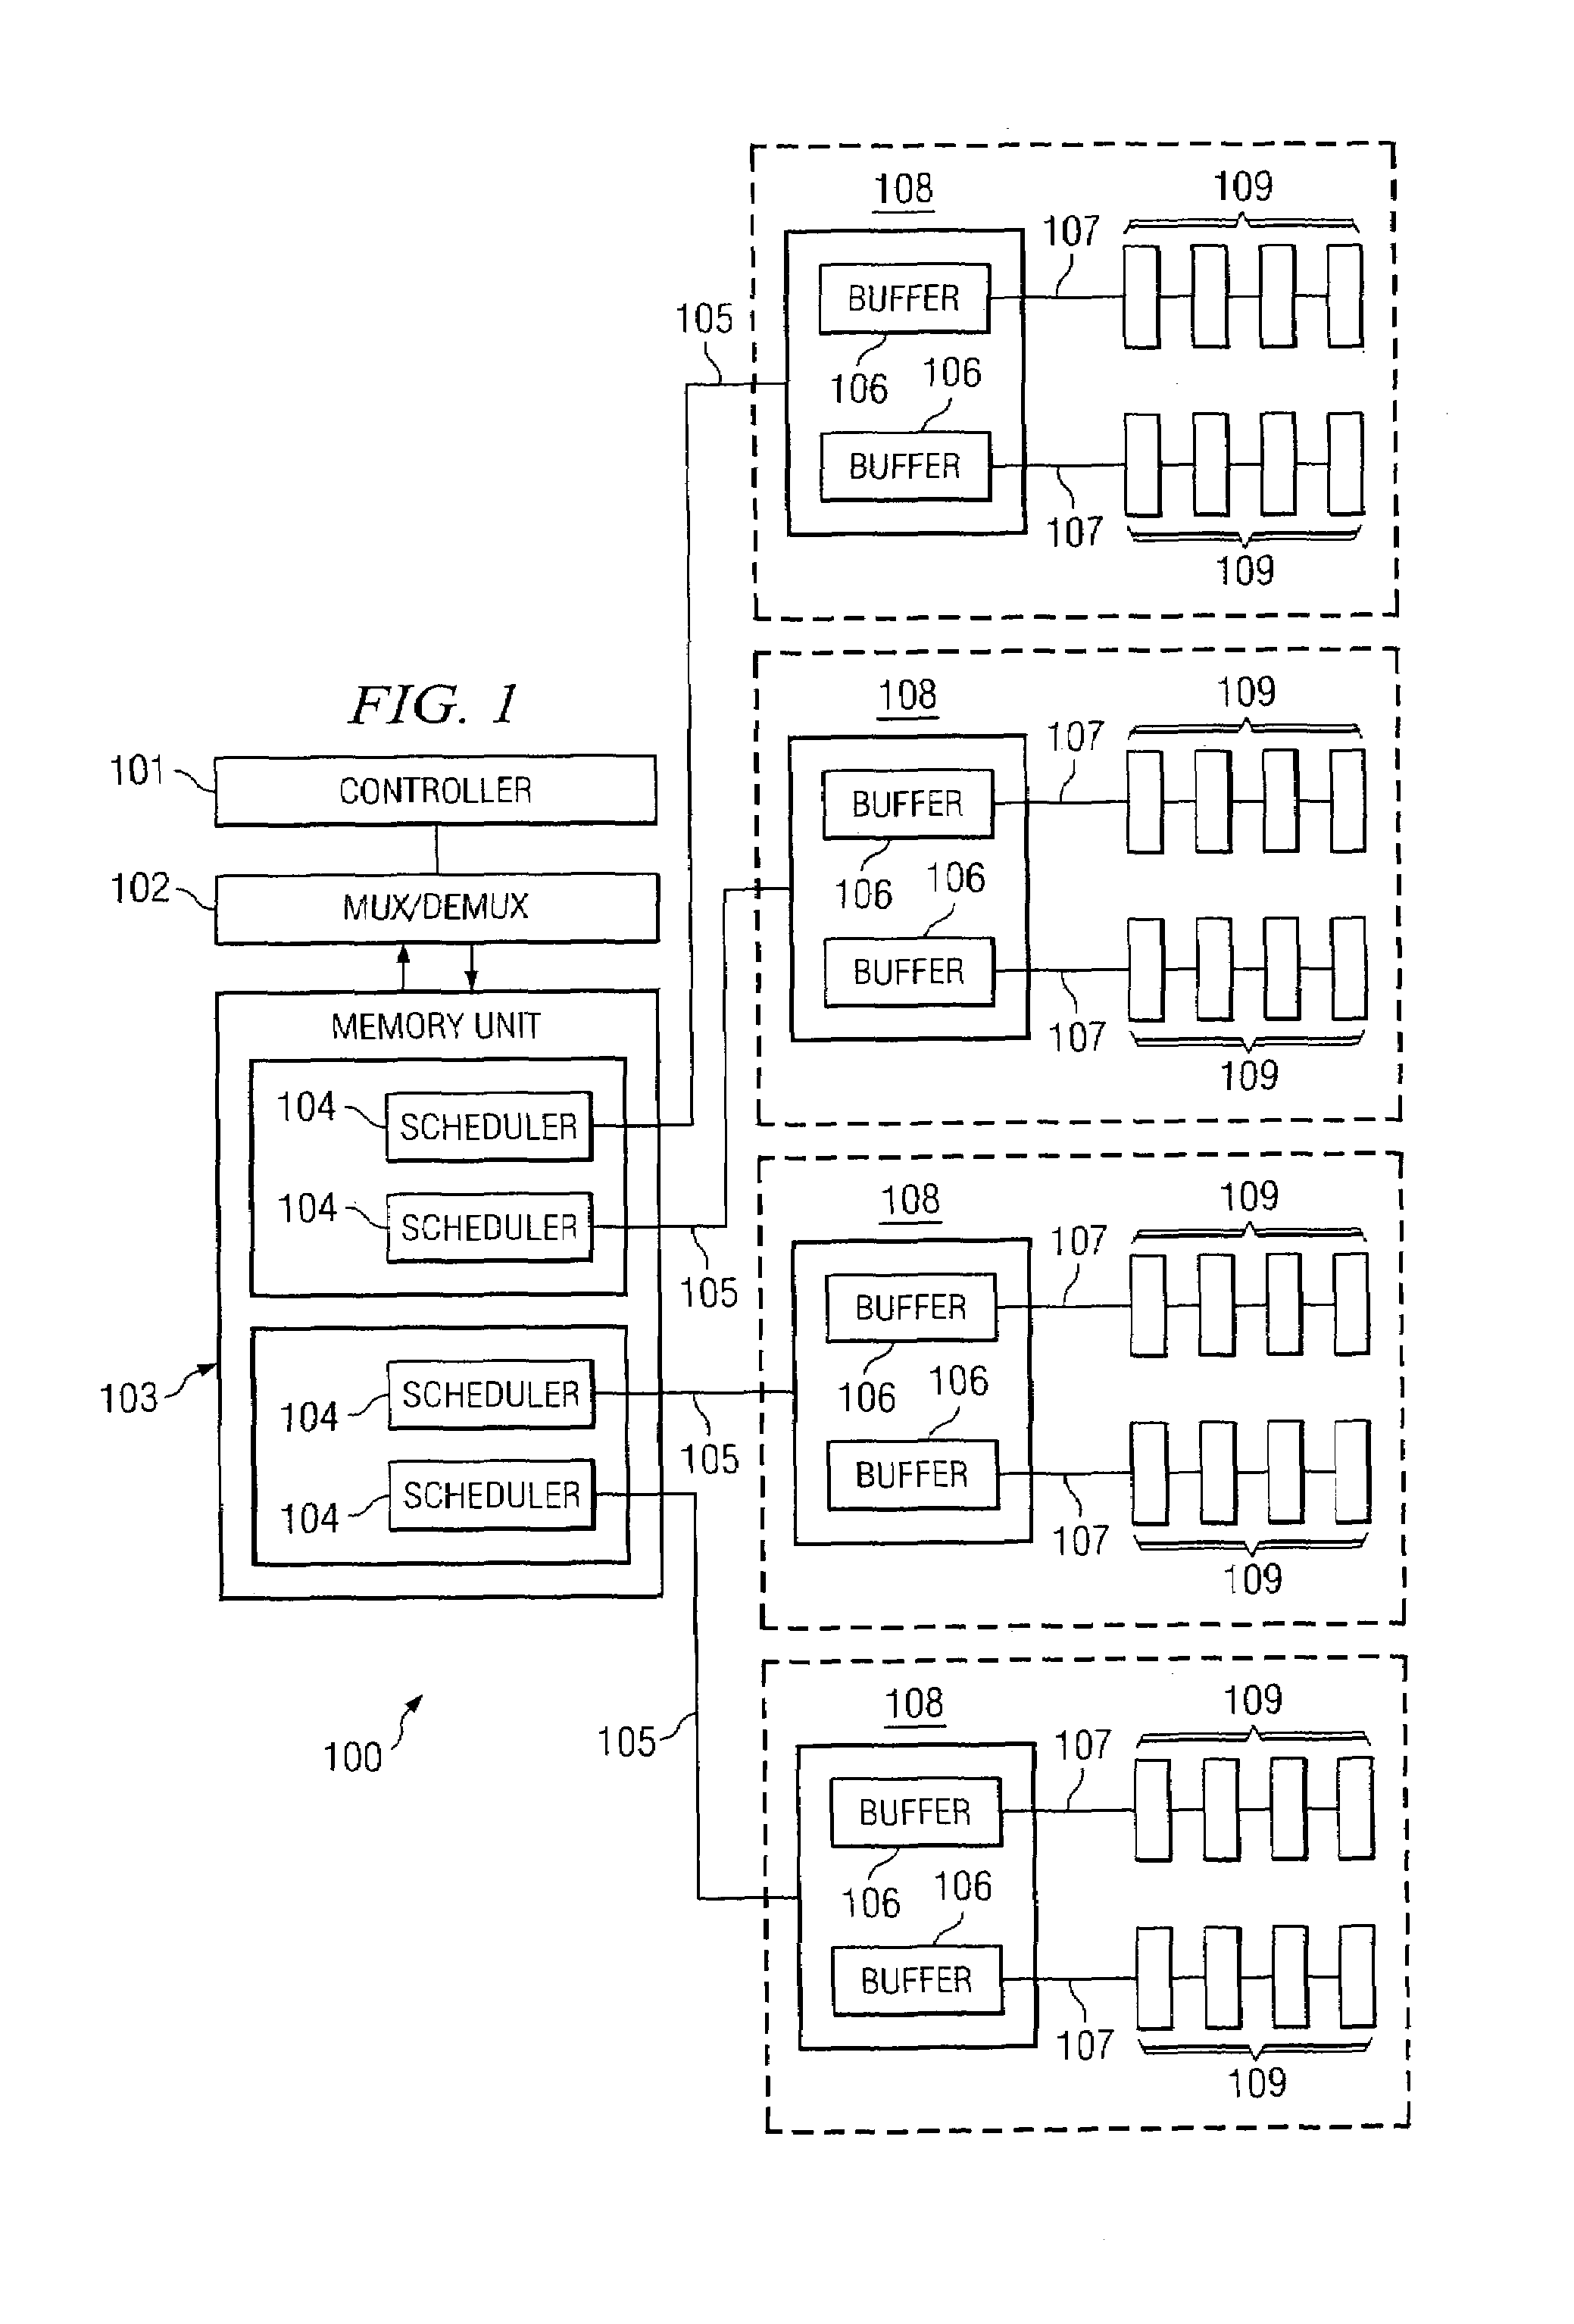 Systems and methods for scripting data errors to facilitate verification of error detection or correction code functionality